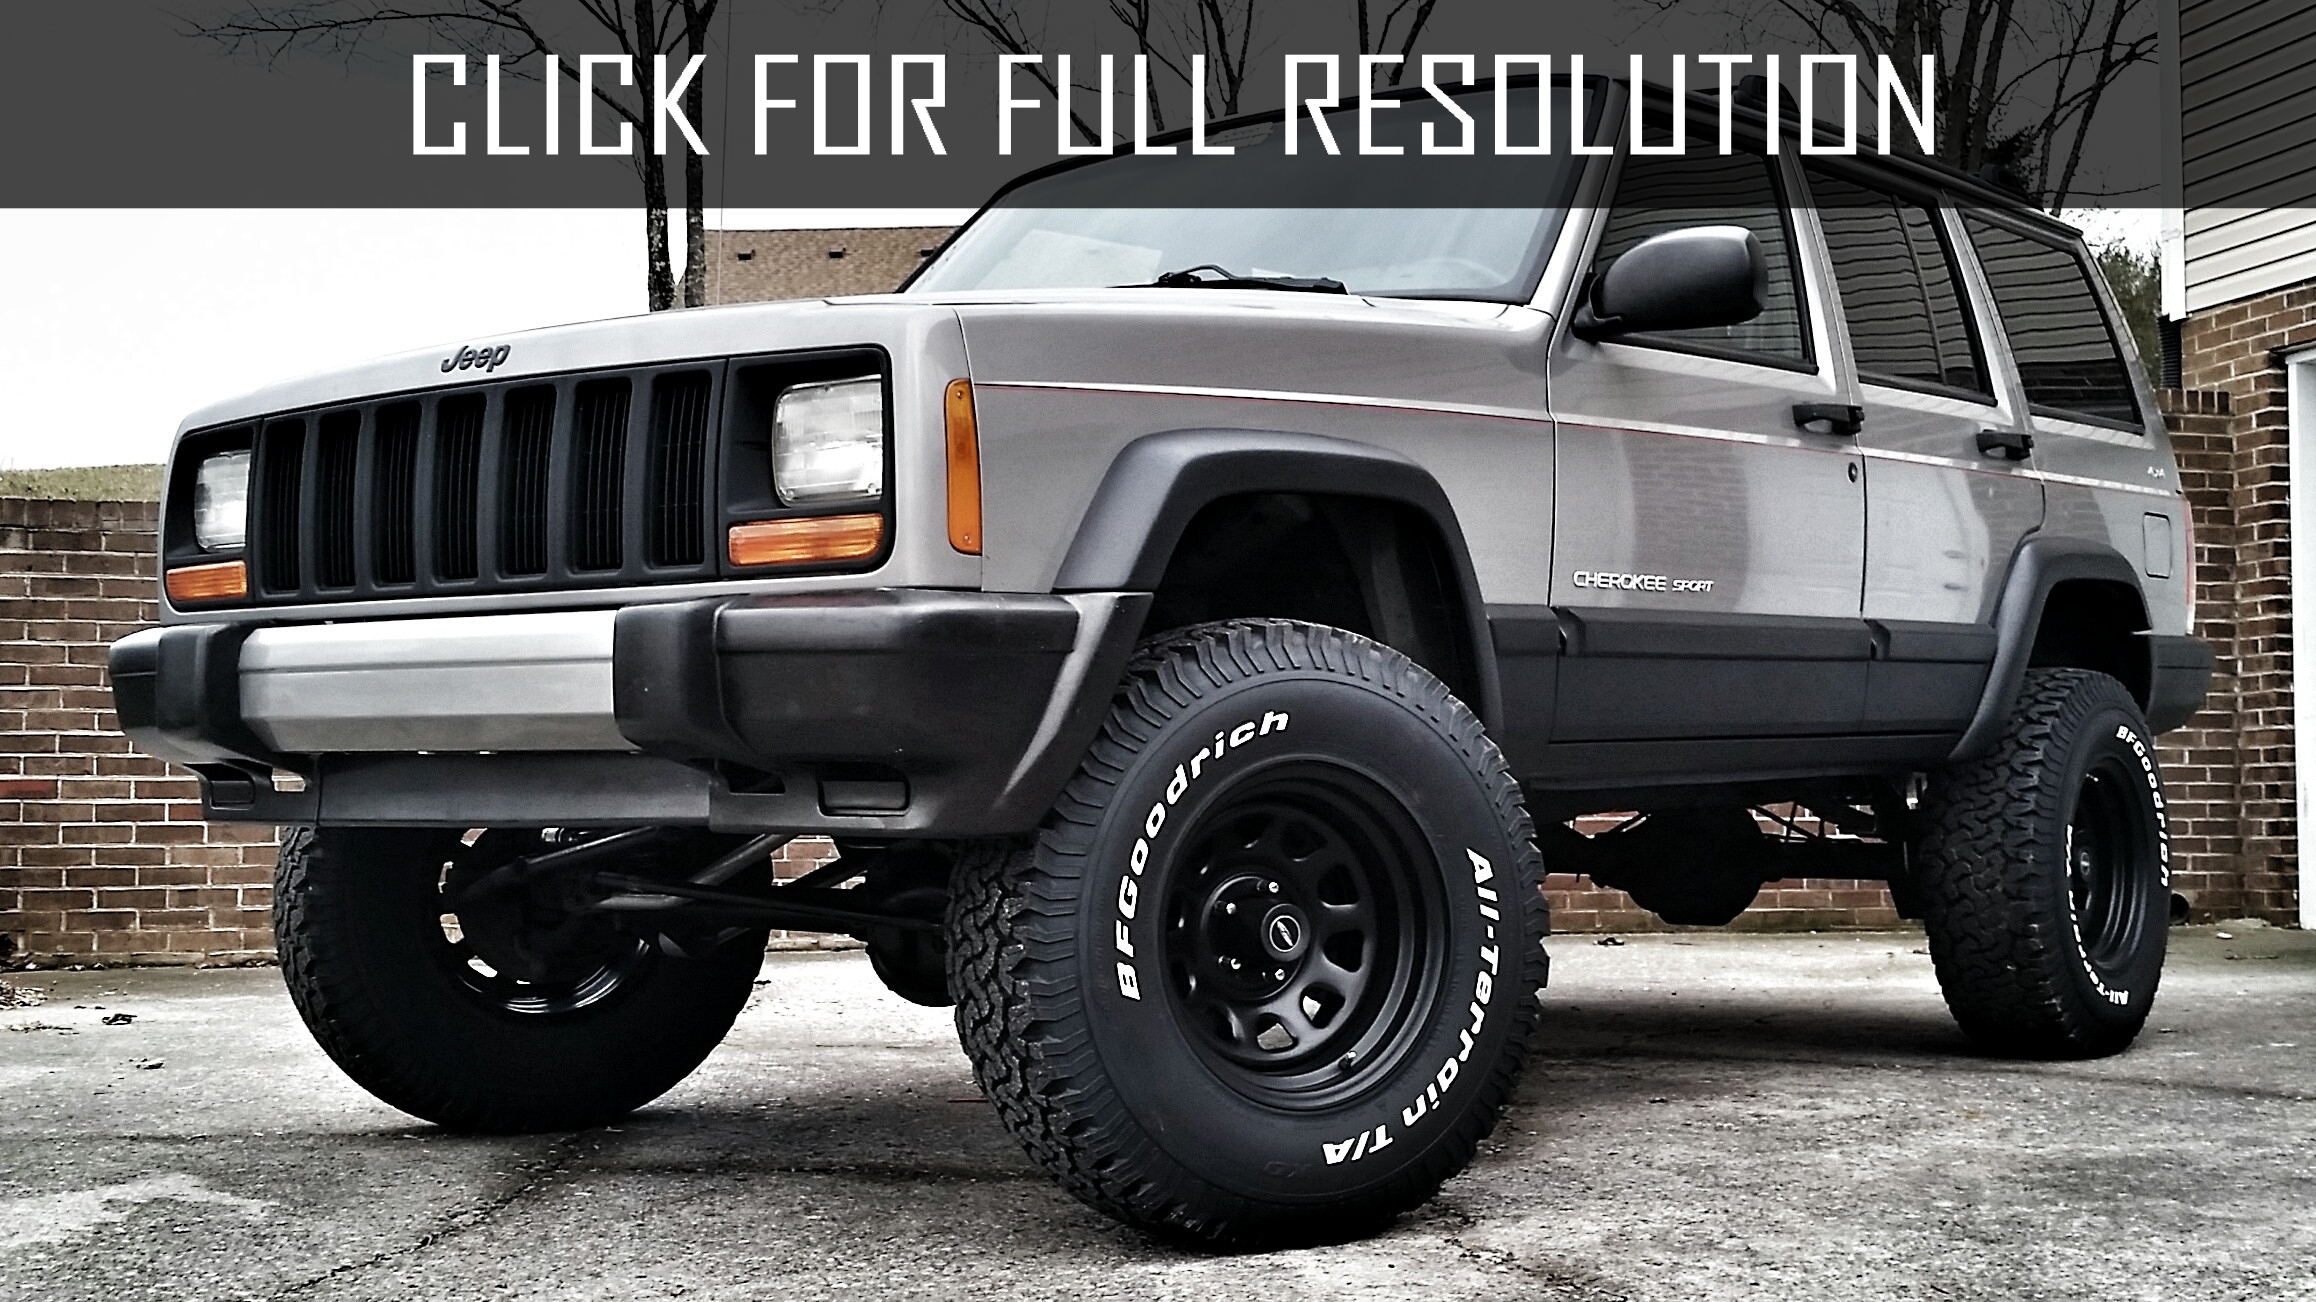 2000 Jeep Cherokee Lifted news, reviews, msrp, ratings